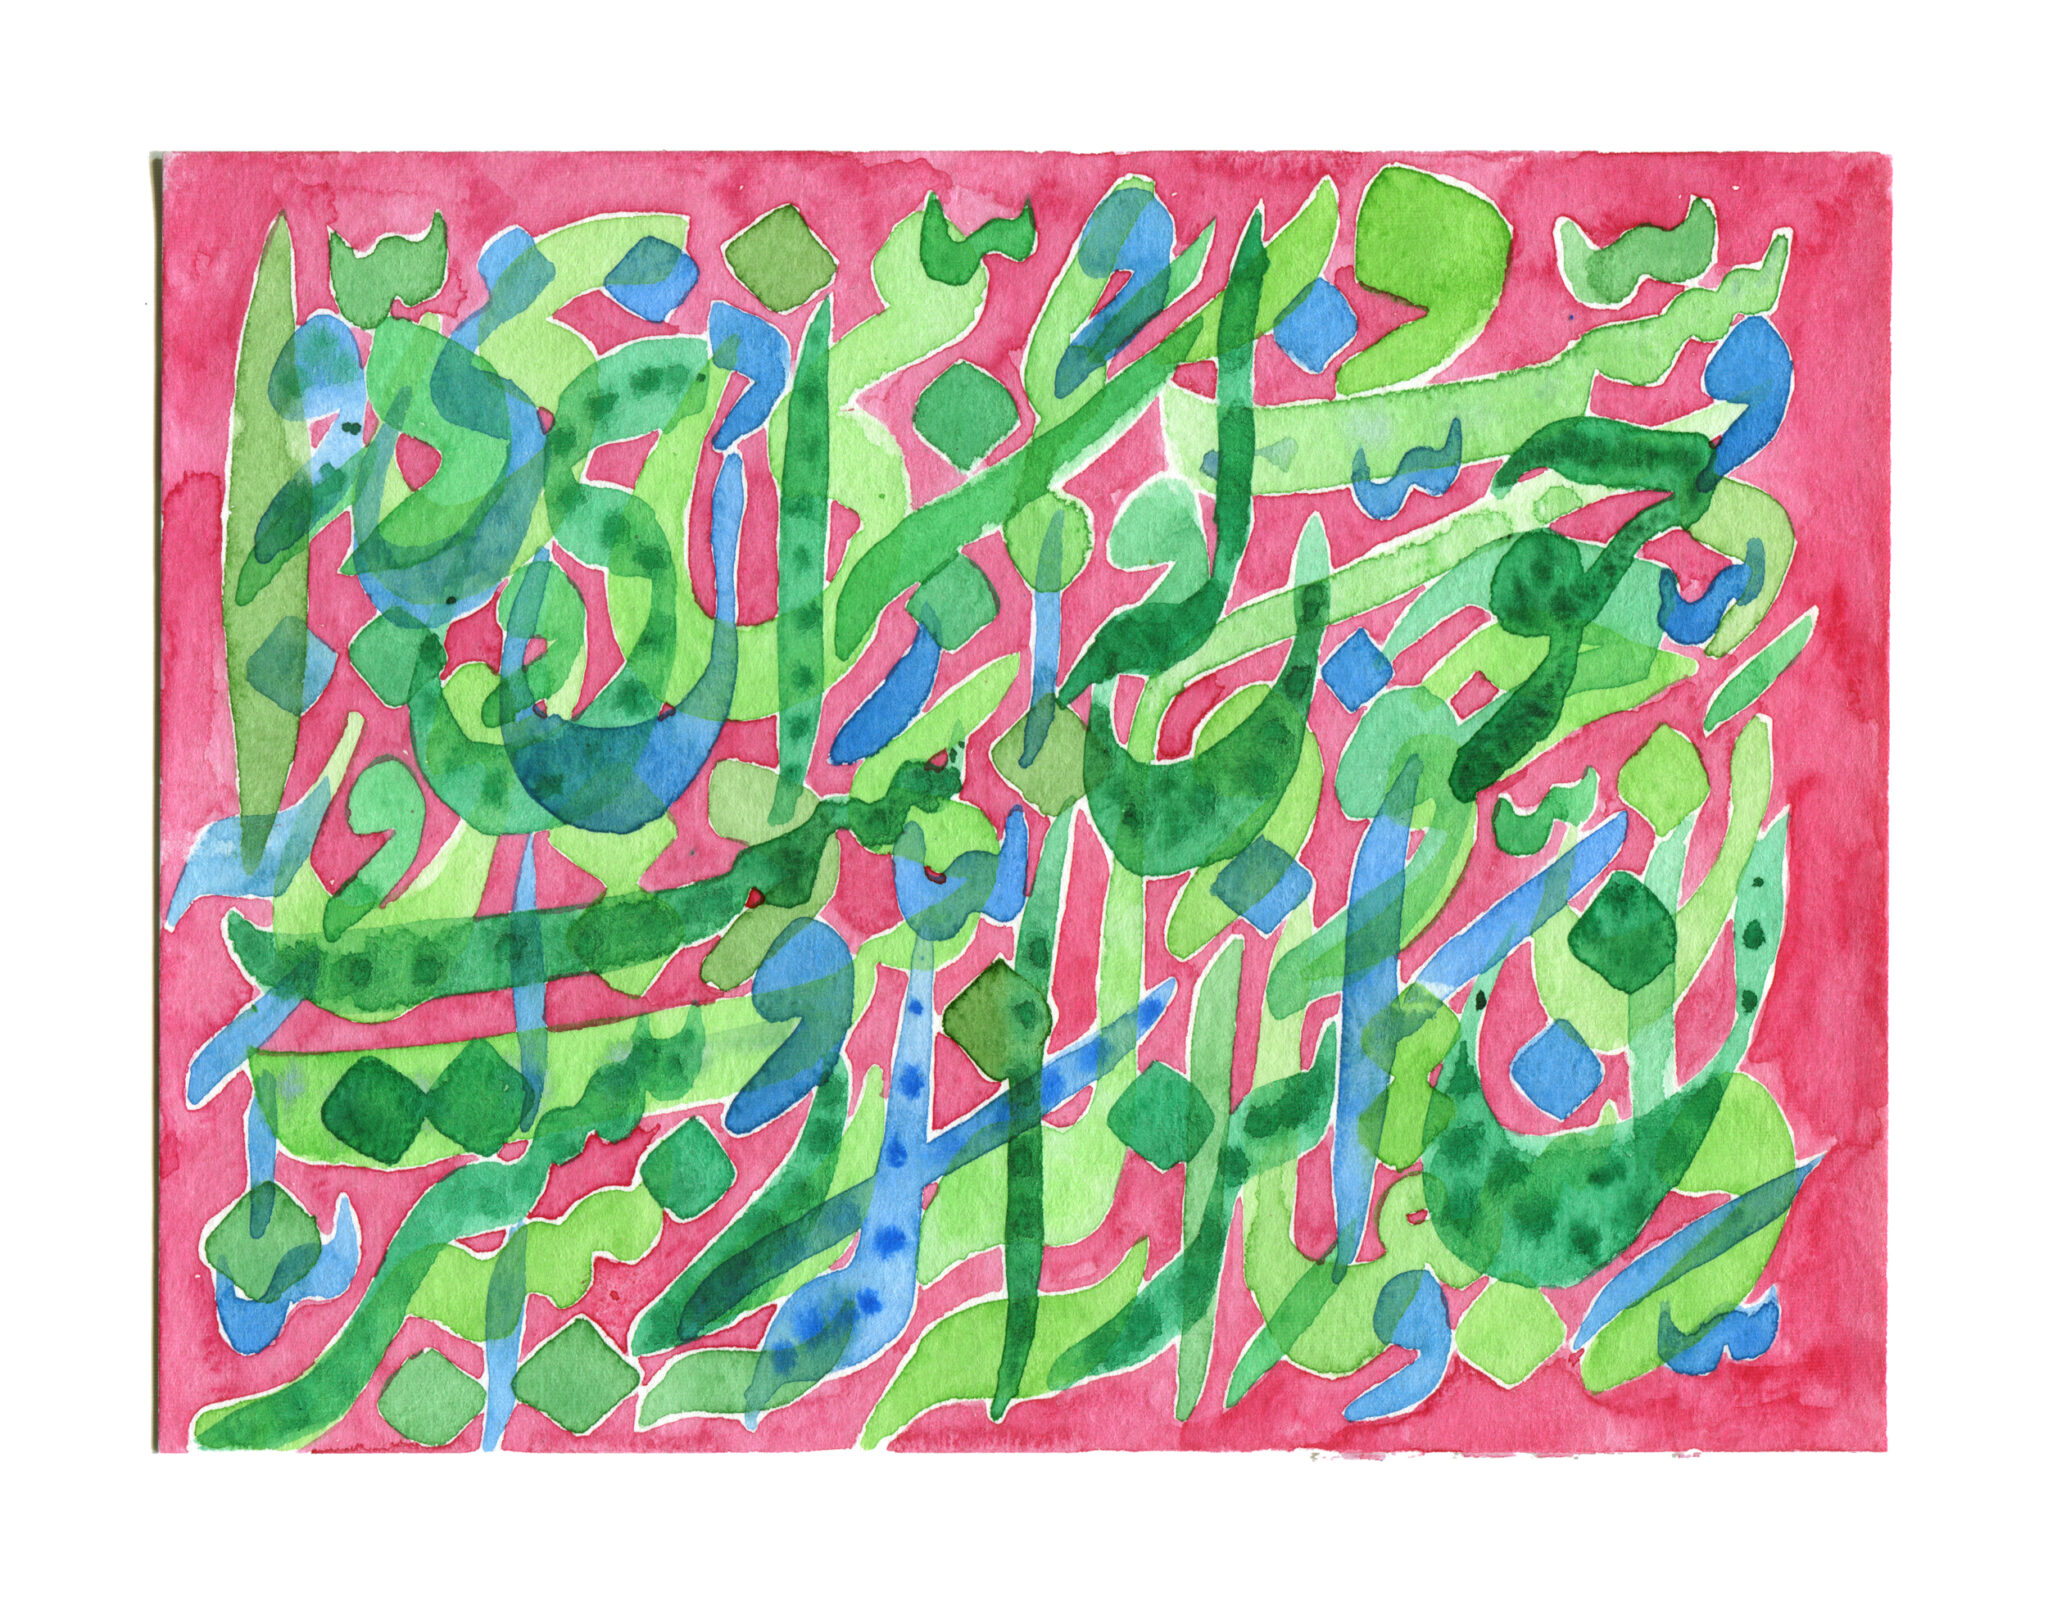 Watercolor painting on paper with Persian Calligraphy by Ziba Rajabi